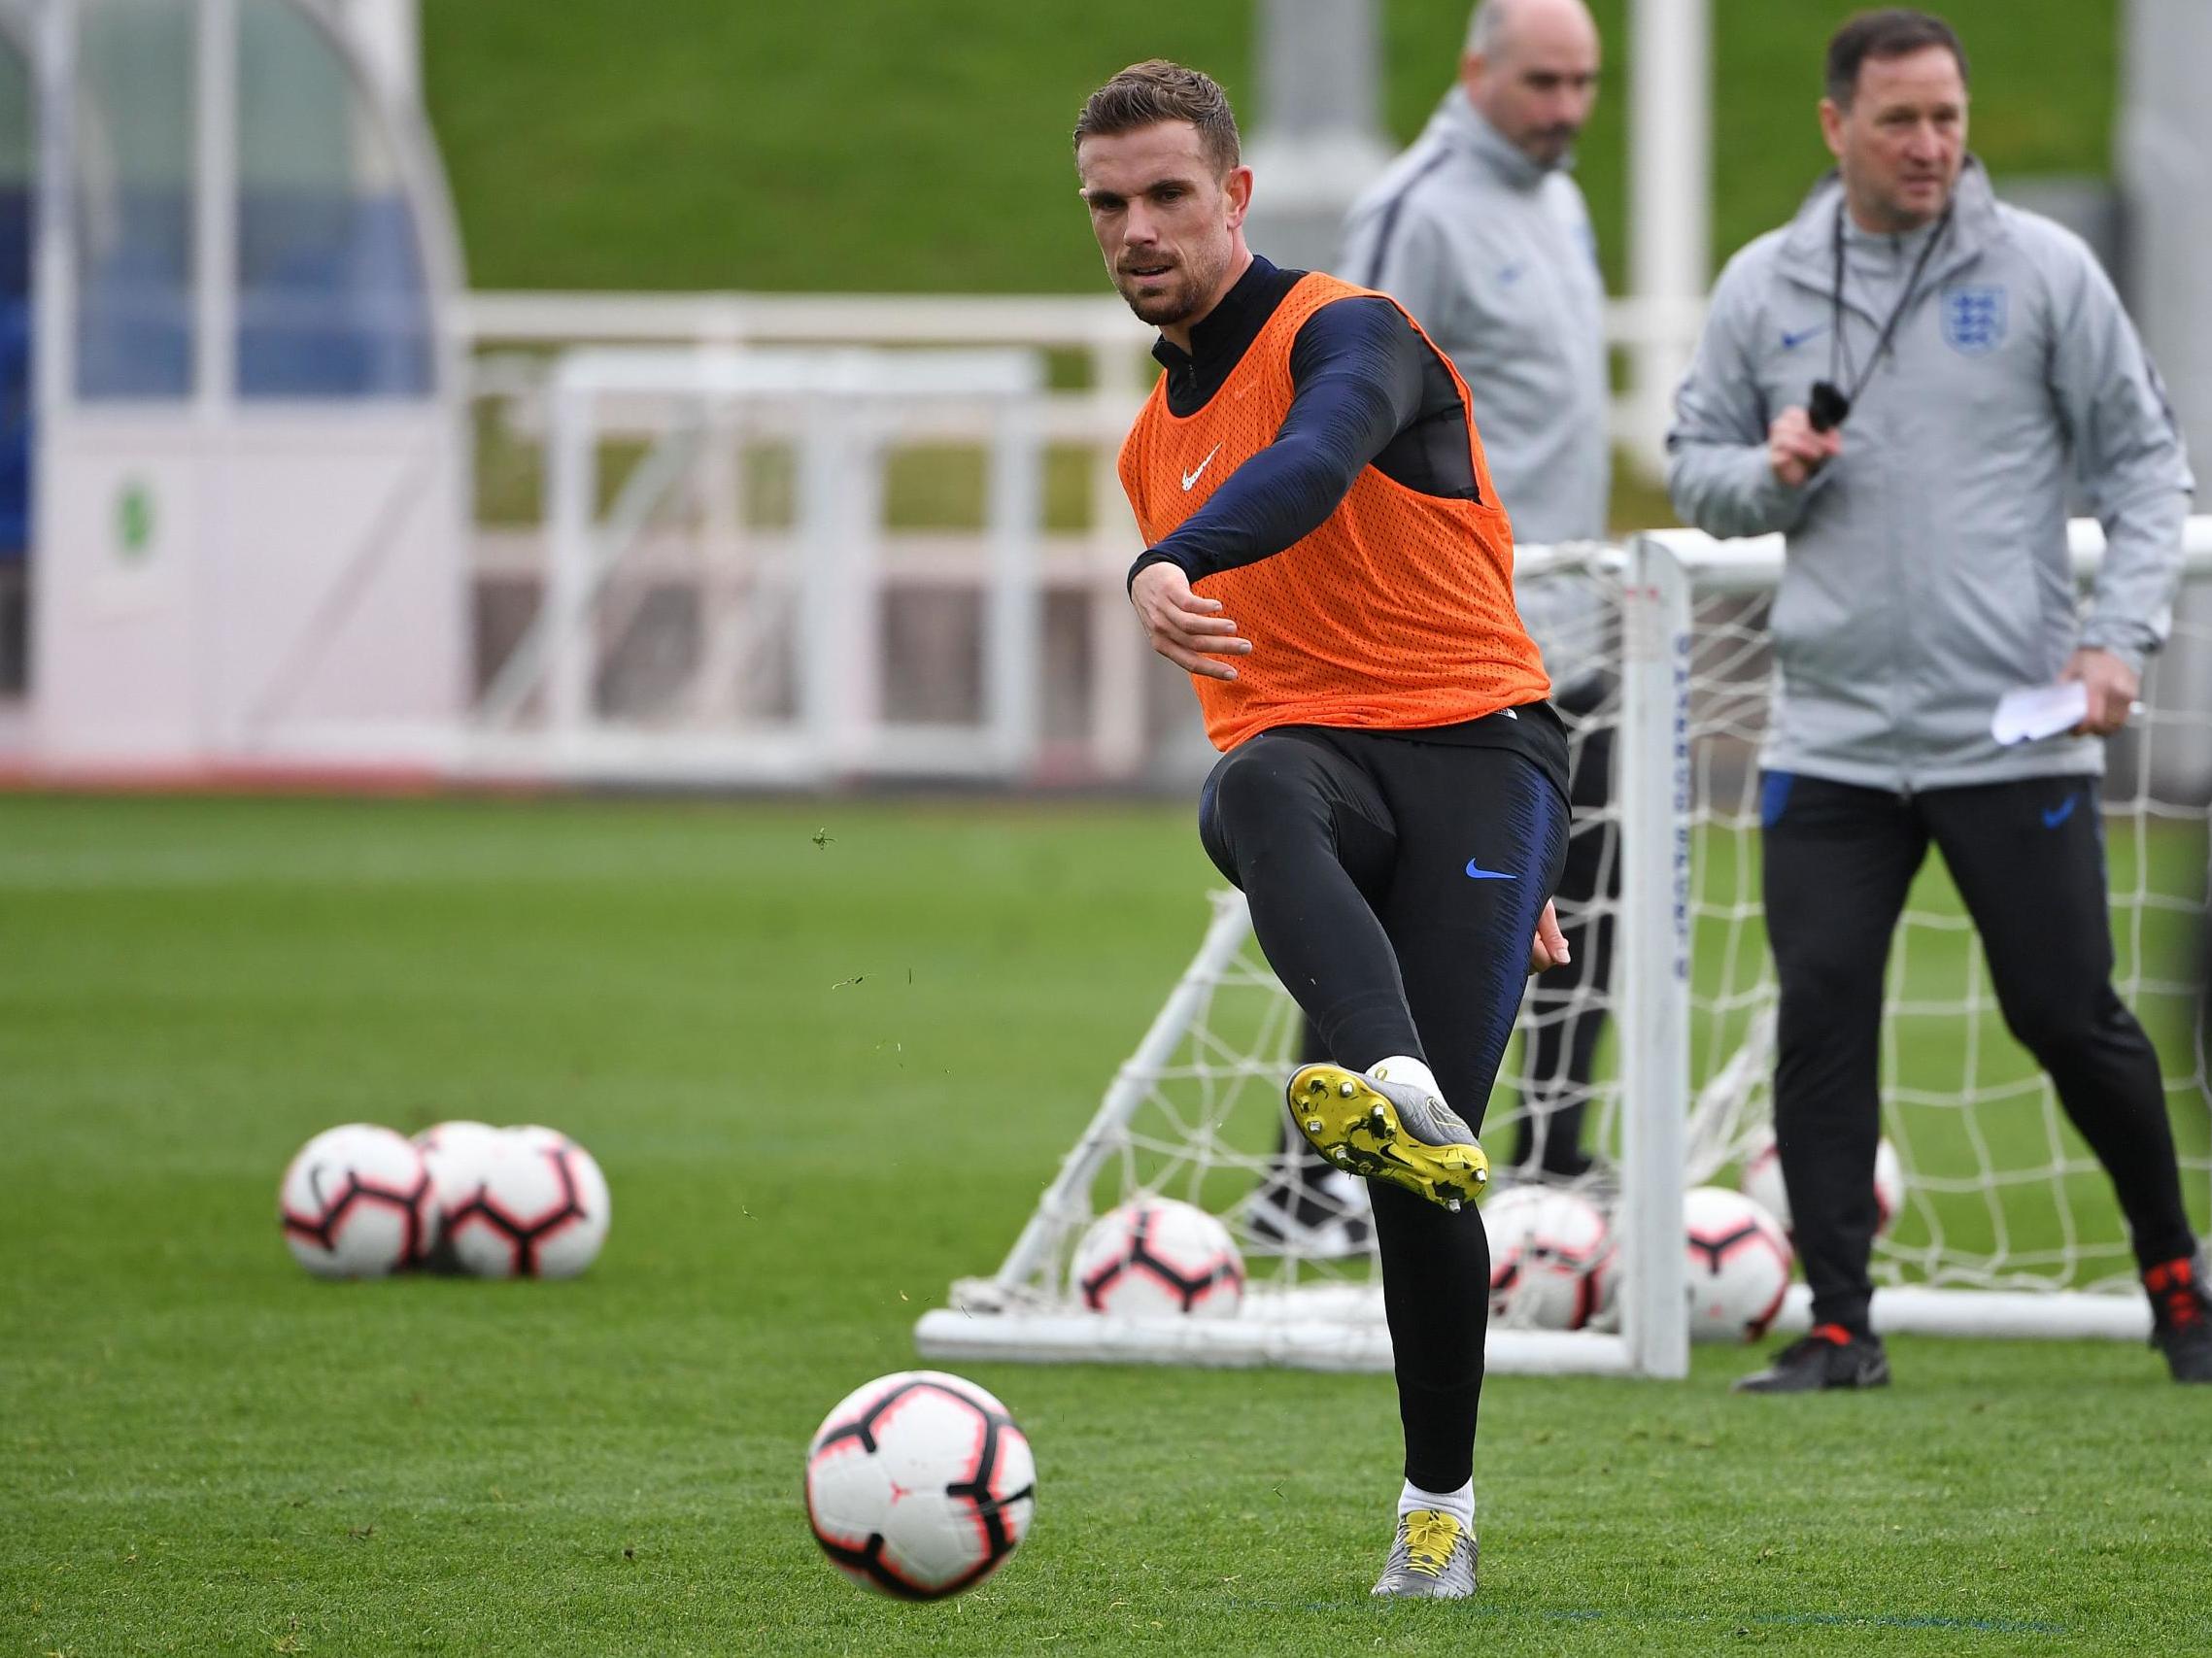 England vs Czech Republic: For Jordan Henderson, the fight to prove his worth never ends